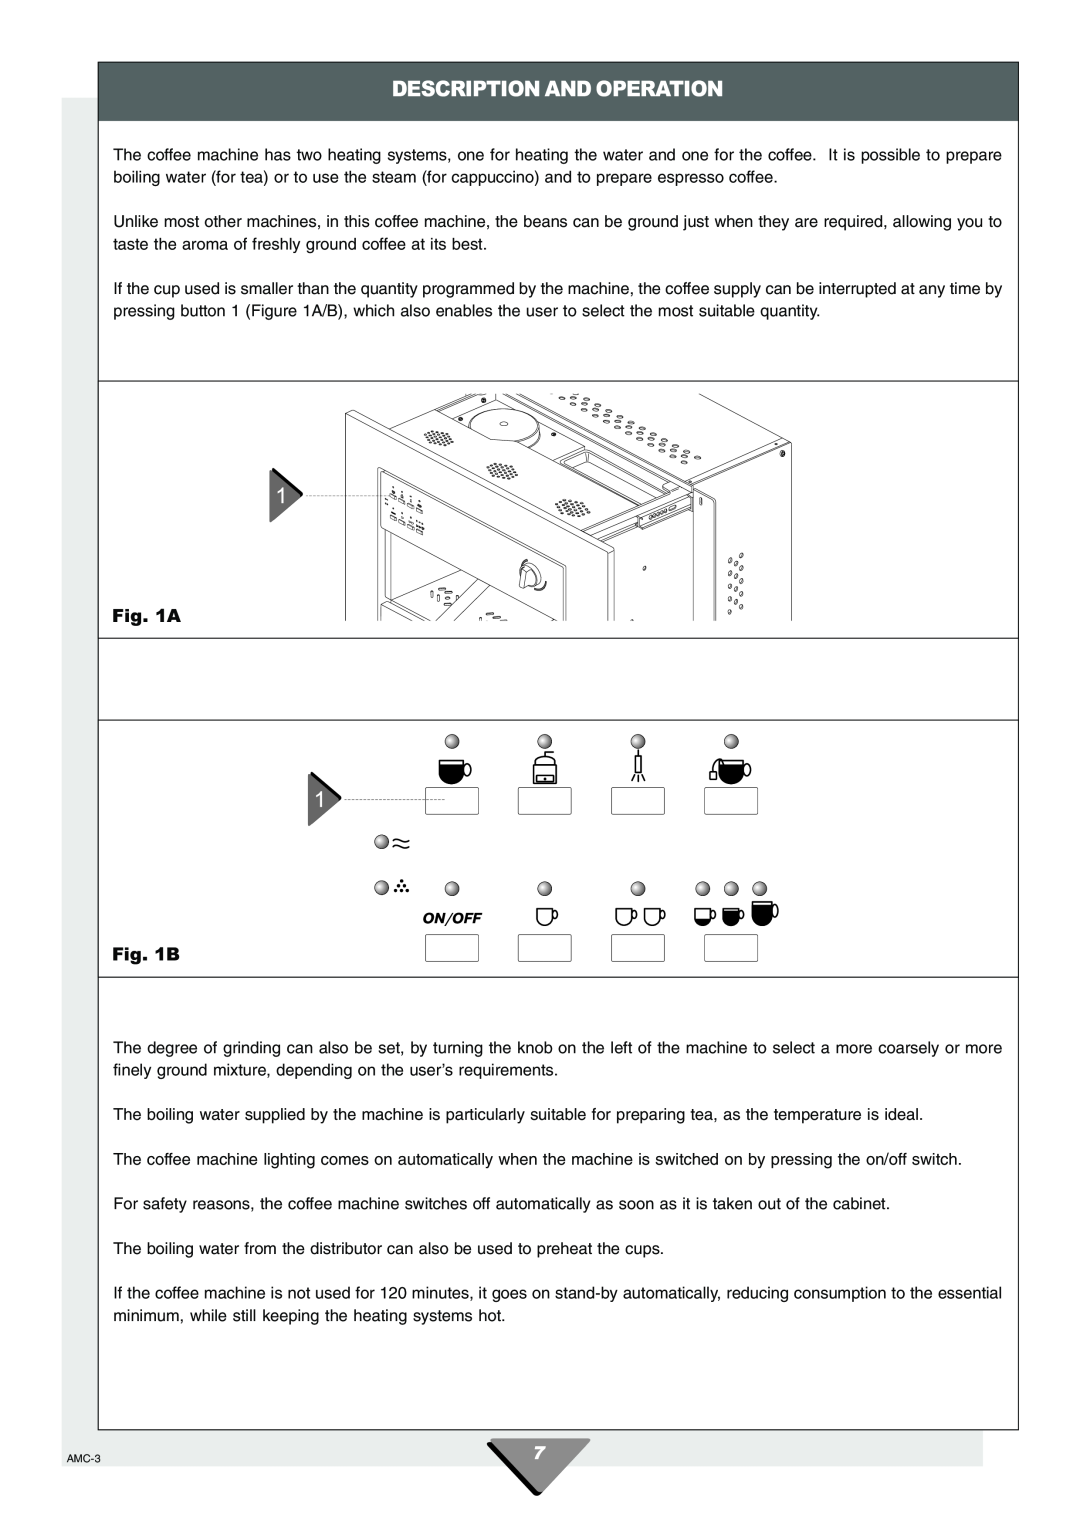 Hotpoint HCM60 manual Description And Operation, A B 